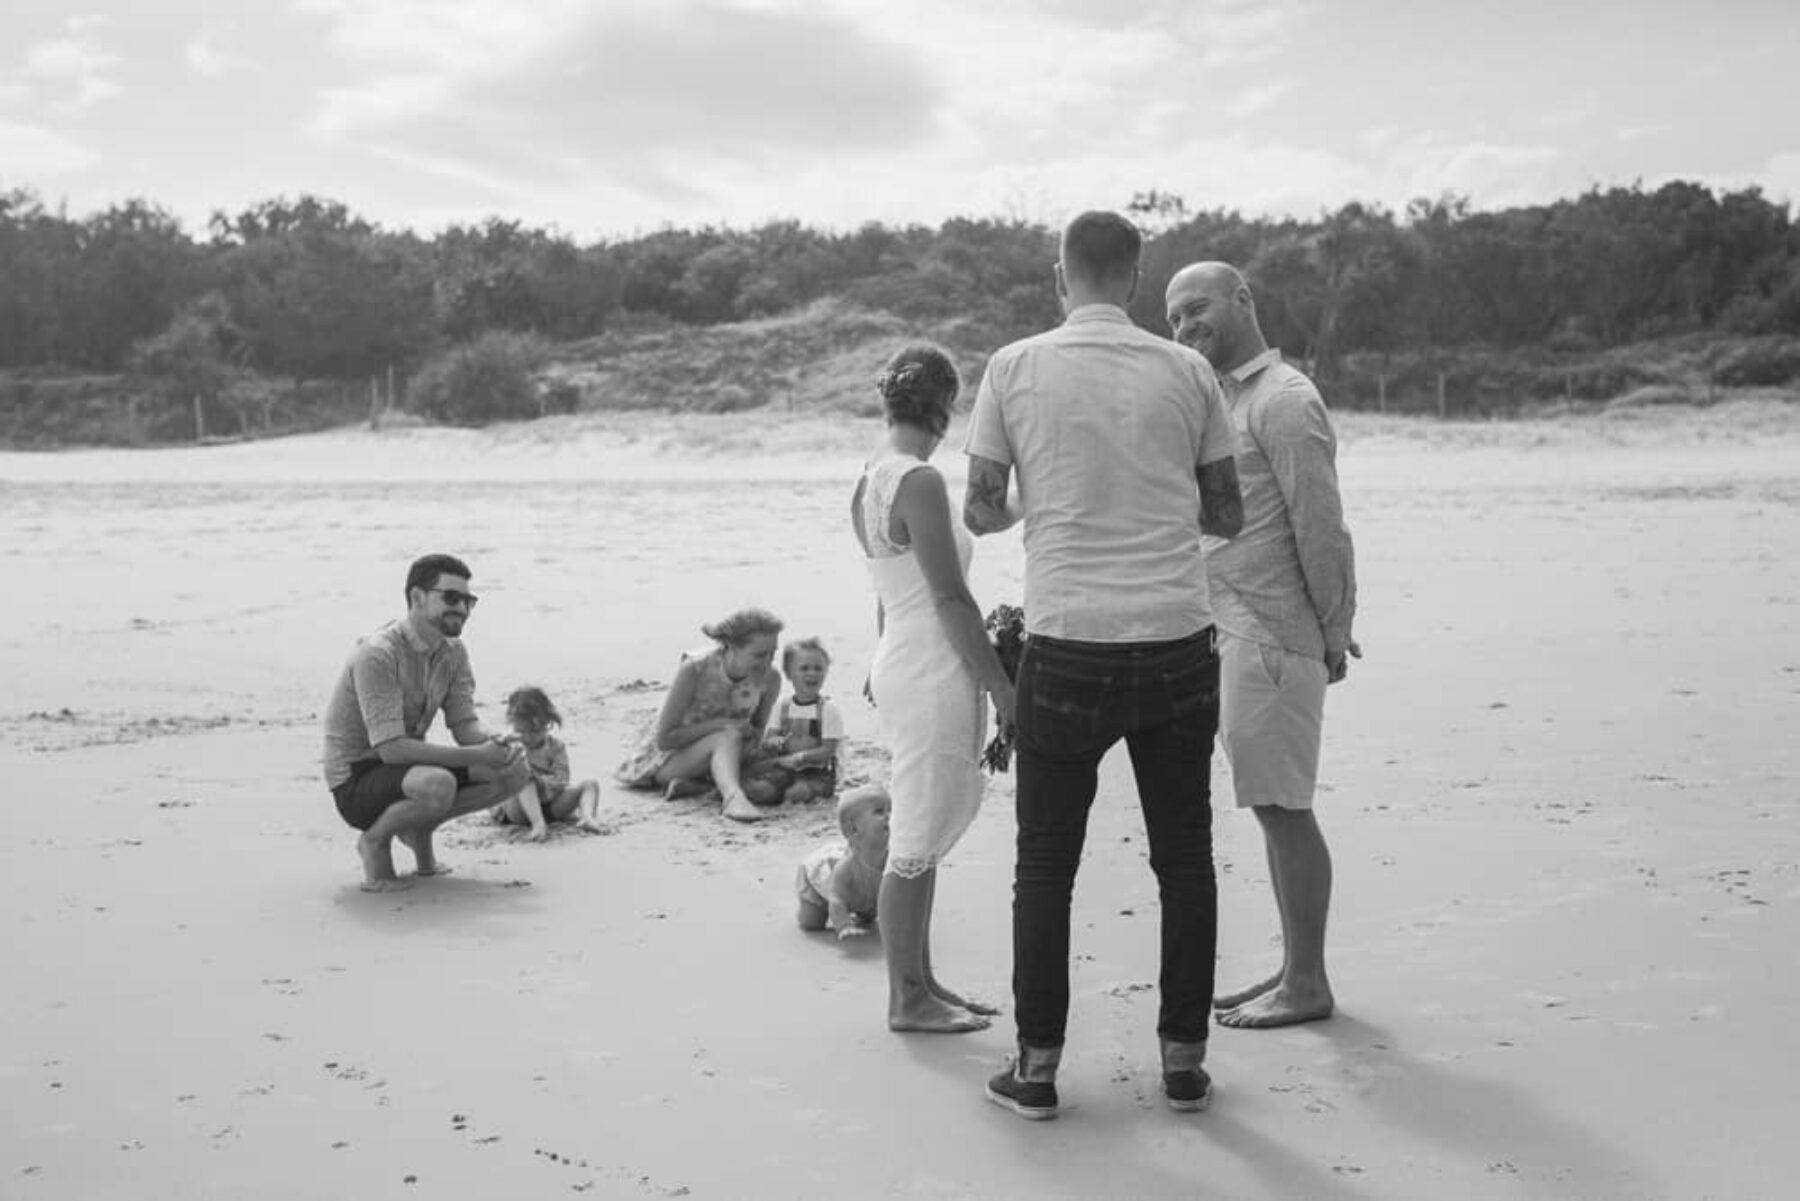 Pared back beach elopement, Brisbane / Photography by Stories by Ash